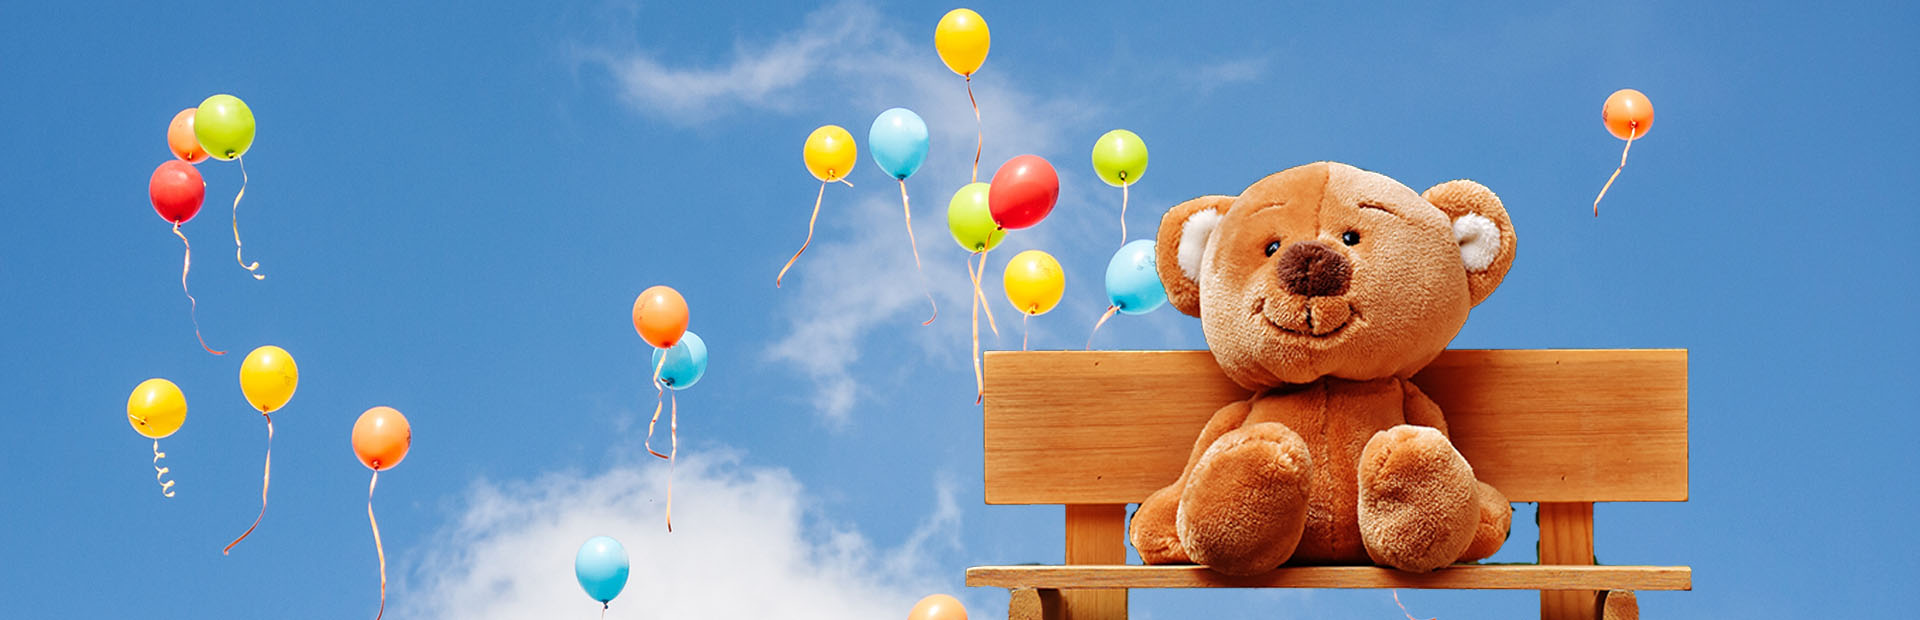 Hero image of brown teddy bear sitting on bench with blue sky and colourful balloons in background